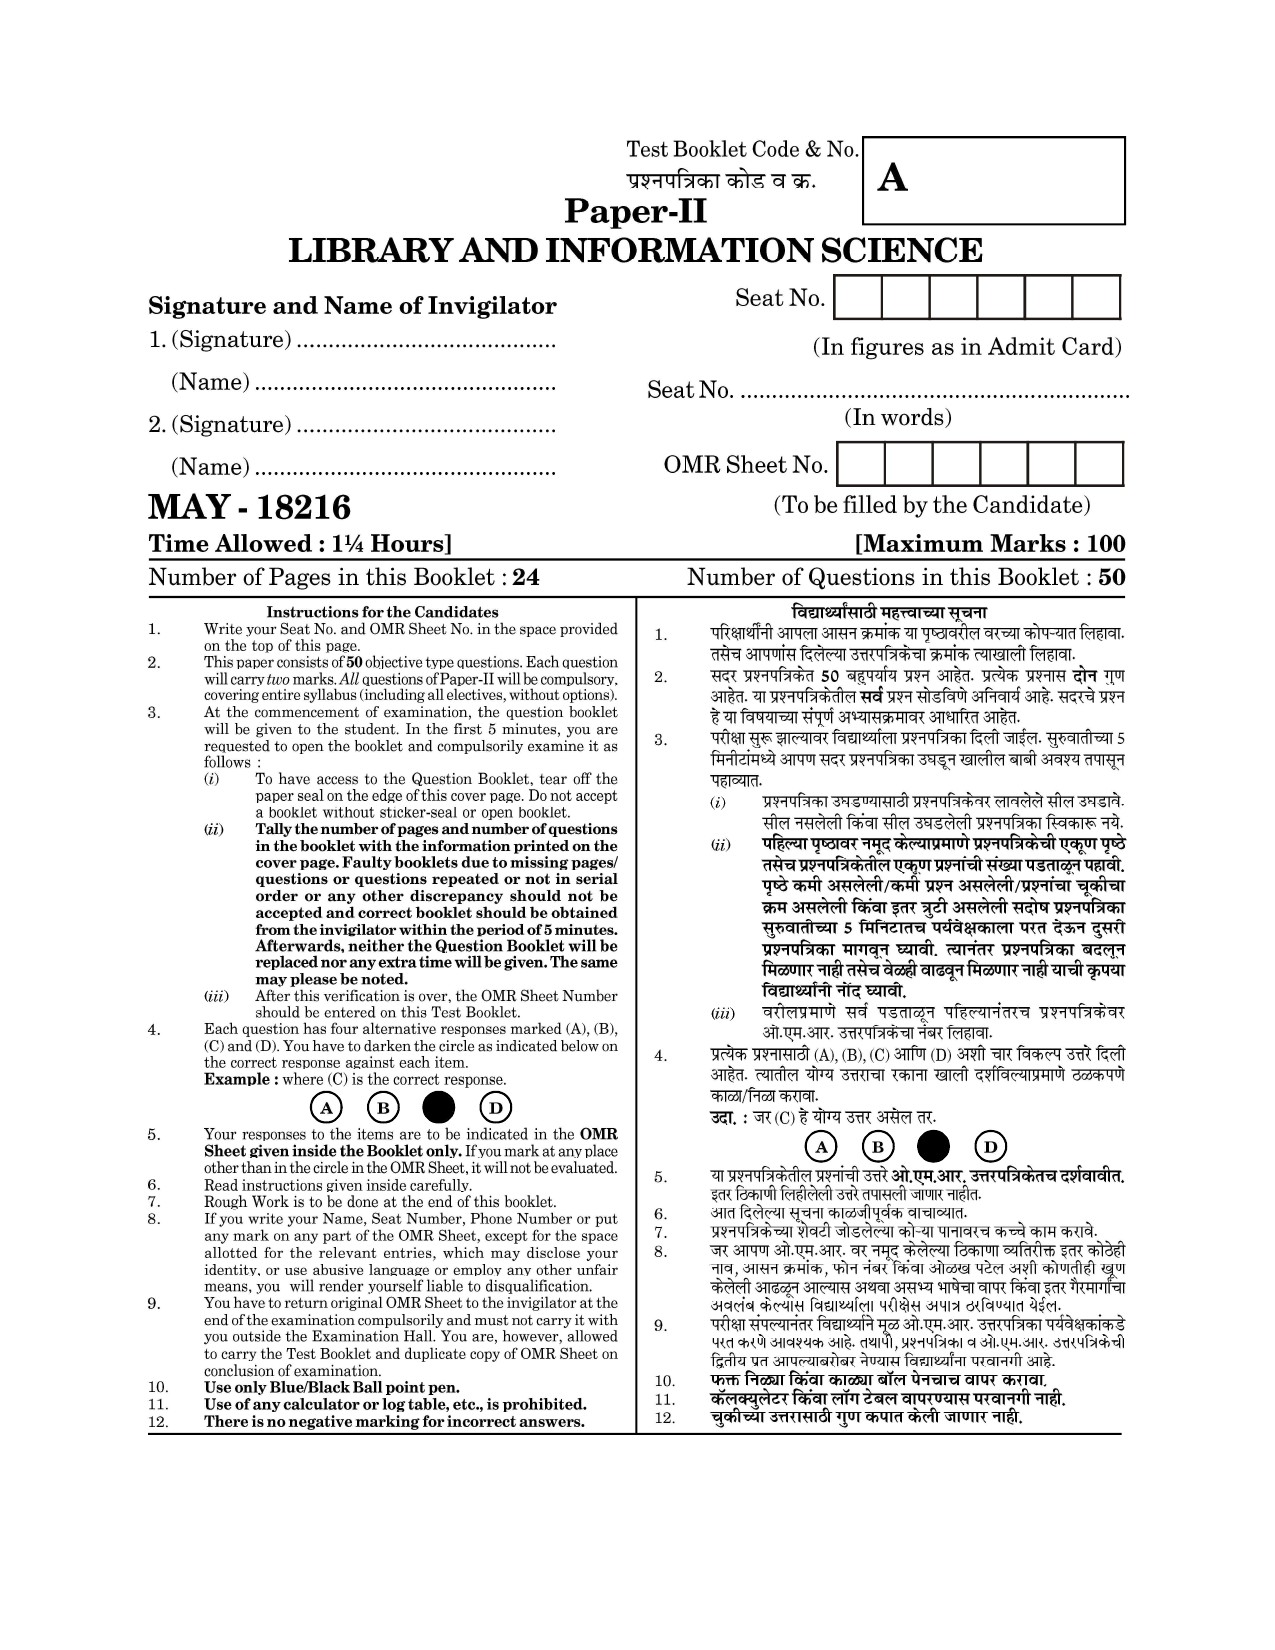 Maharashtra SET Library Information Science Question Paper II May 2016 1